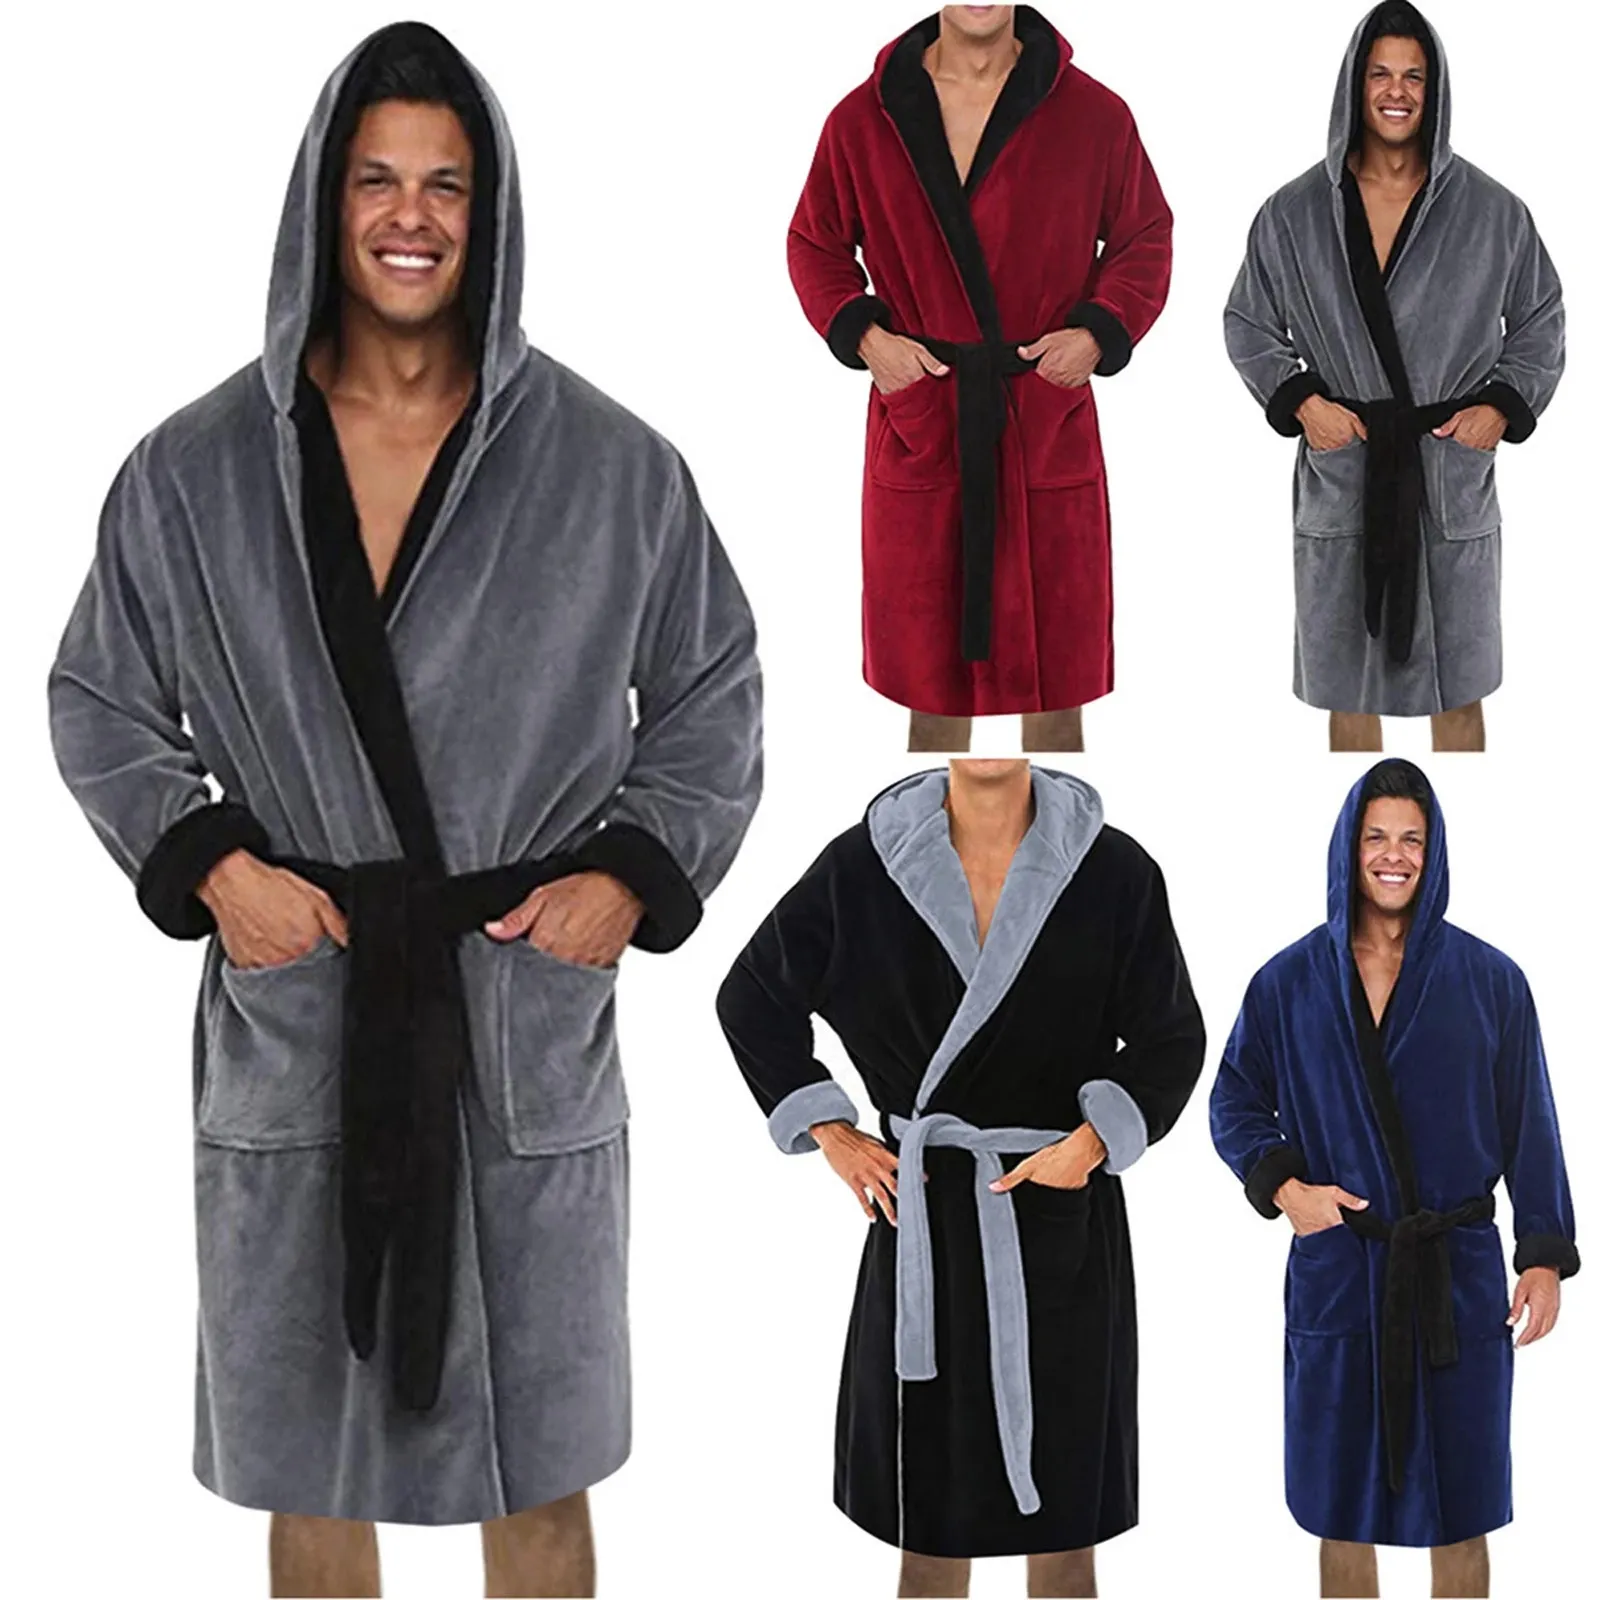 Latest best product in the industry 100% Cotton Waffle Weave Bathrobe Fashionable warm Hooded Terry Cloth Robe